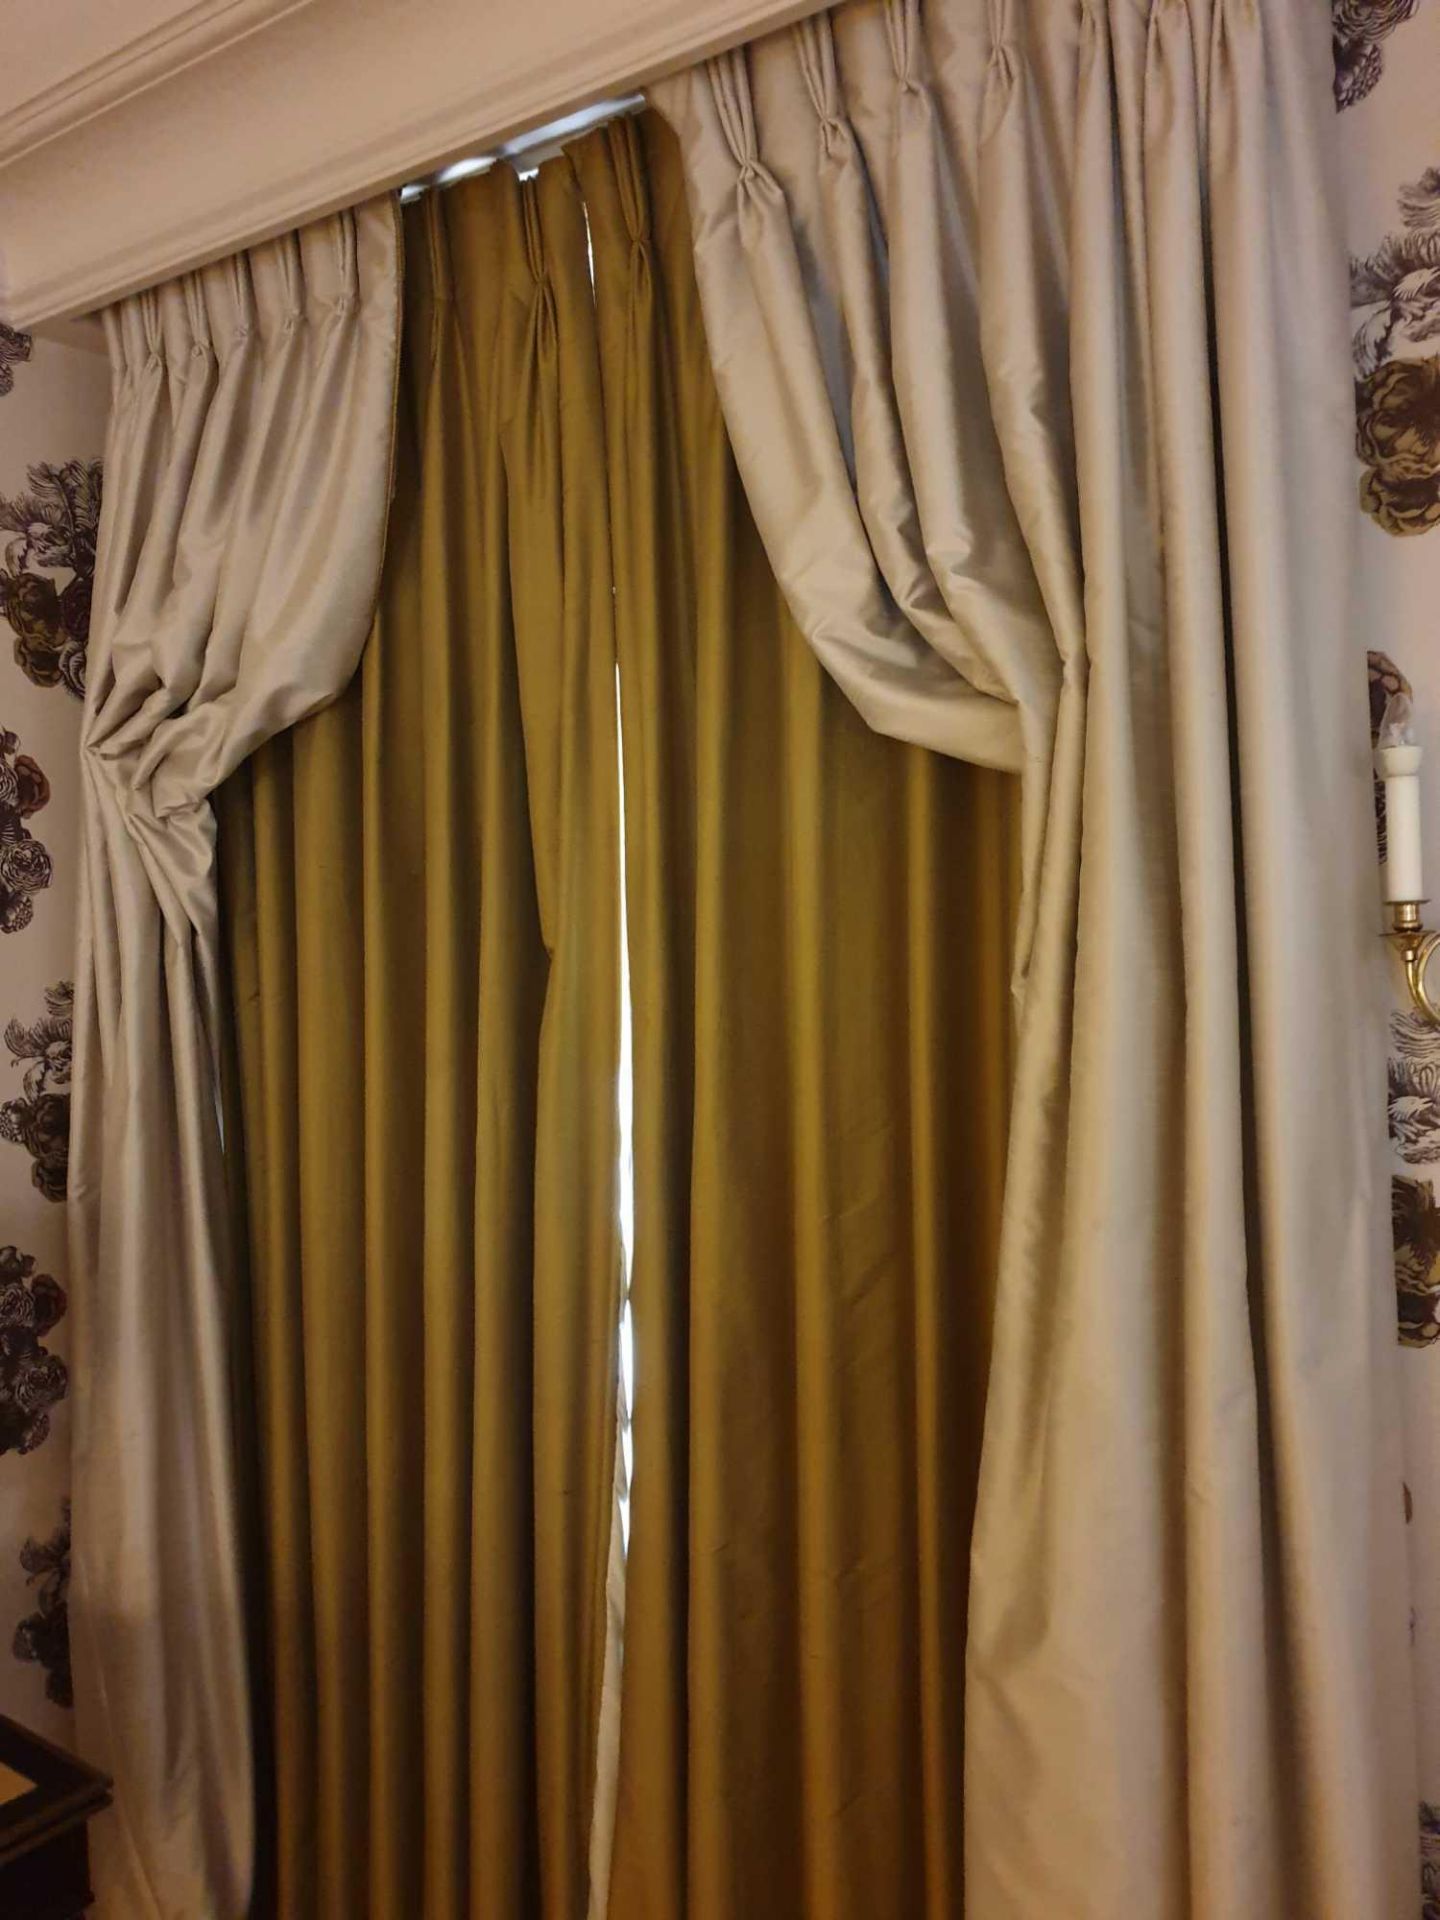 A Pair Of Silk Drapes And Jabots 160 x 250cm (Room 320)